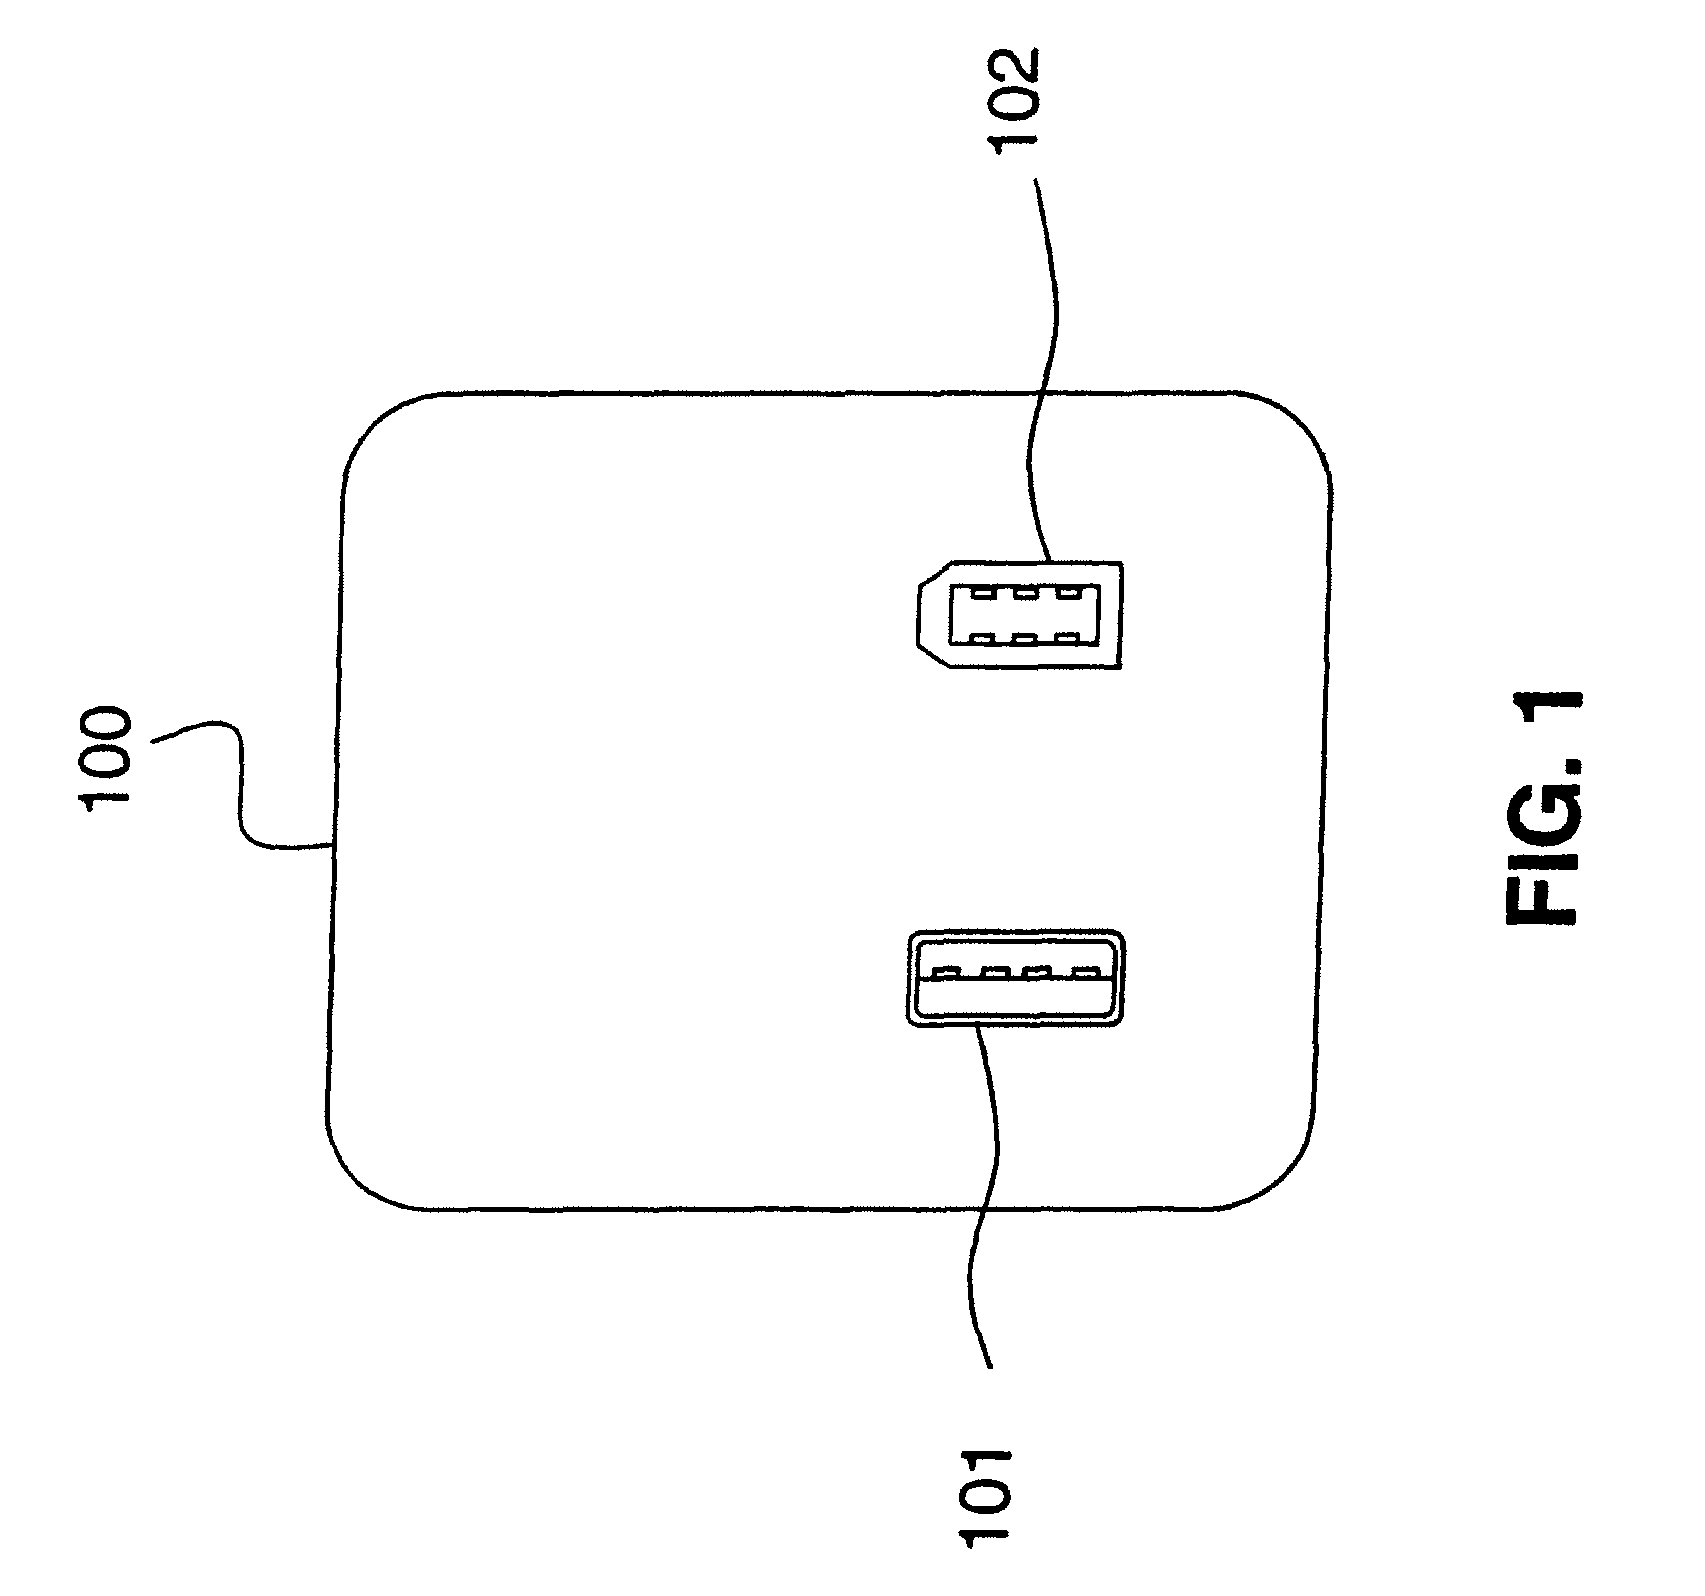 Video game controller charging system having a docking structure